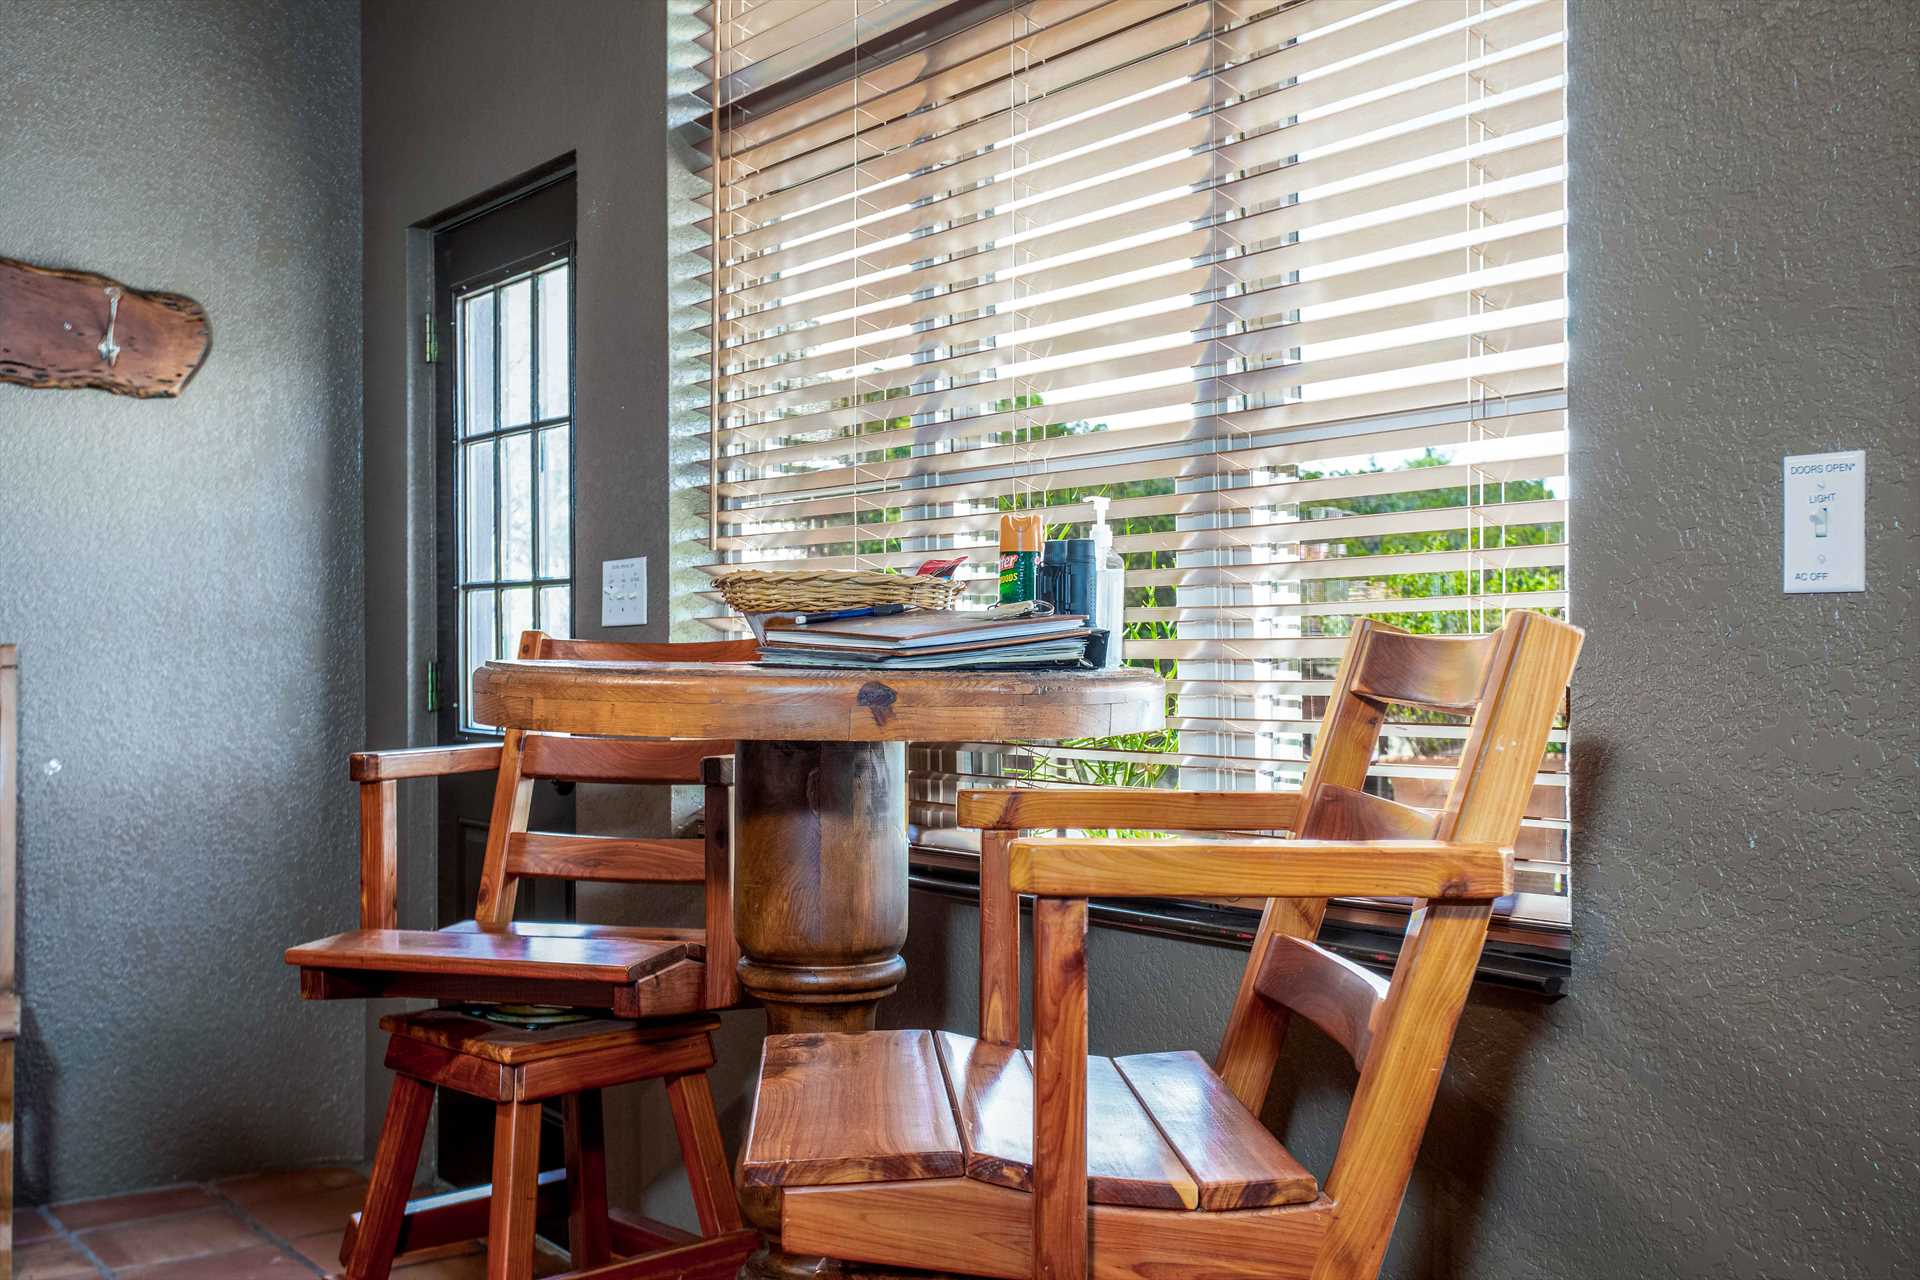                                                 Bar-style seating at a convenient window-side table makes the perfect setting for a cozy breakfast nook.